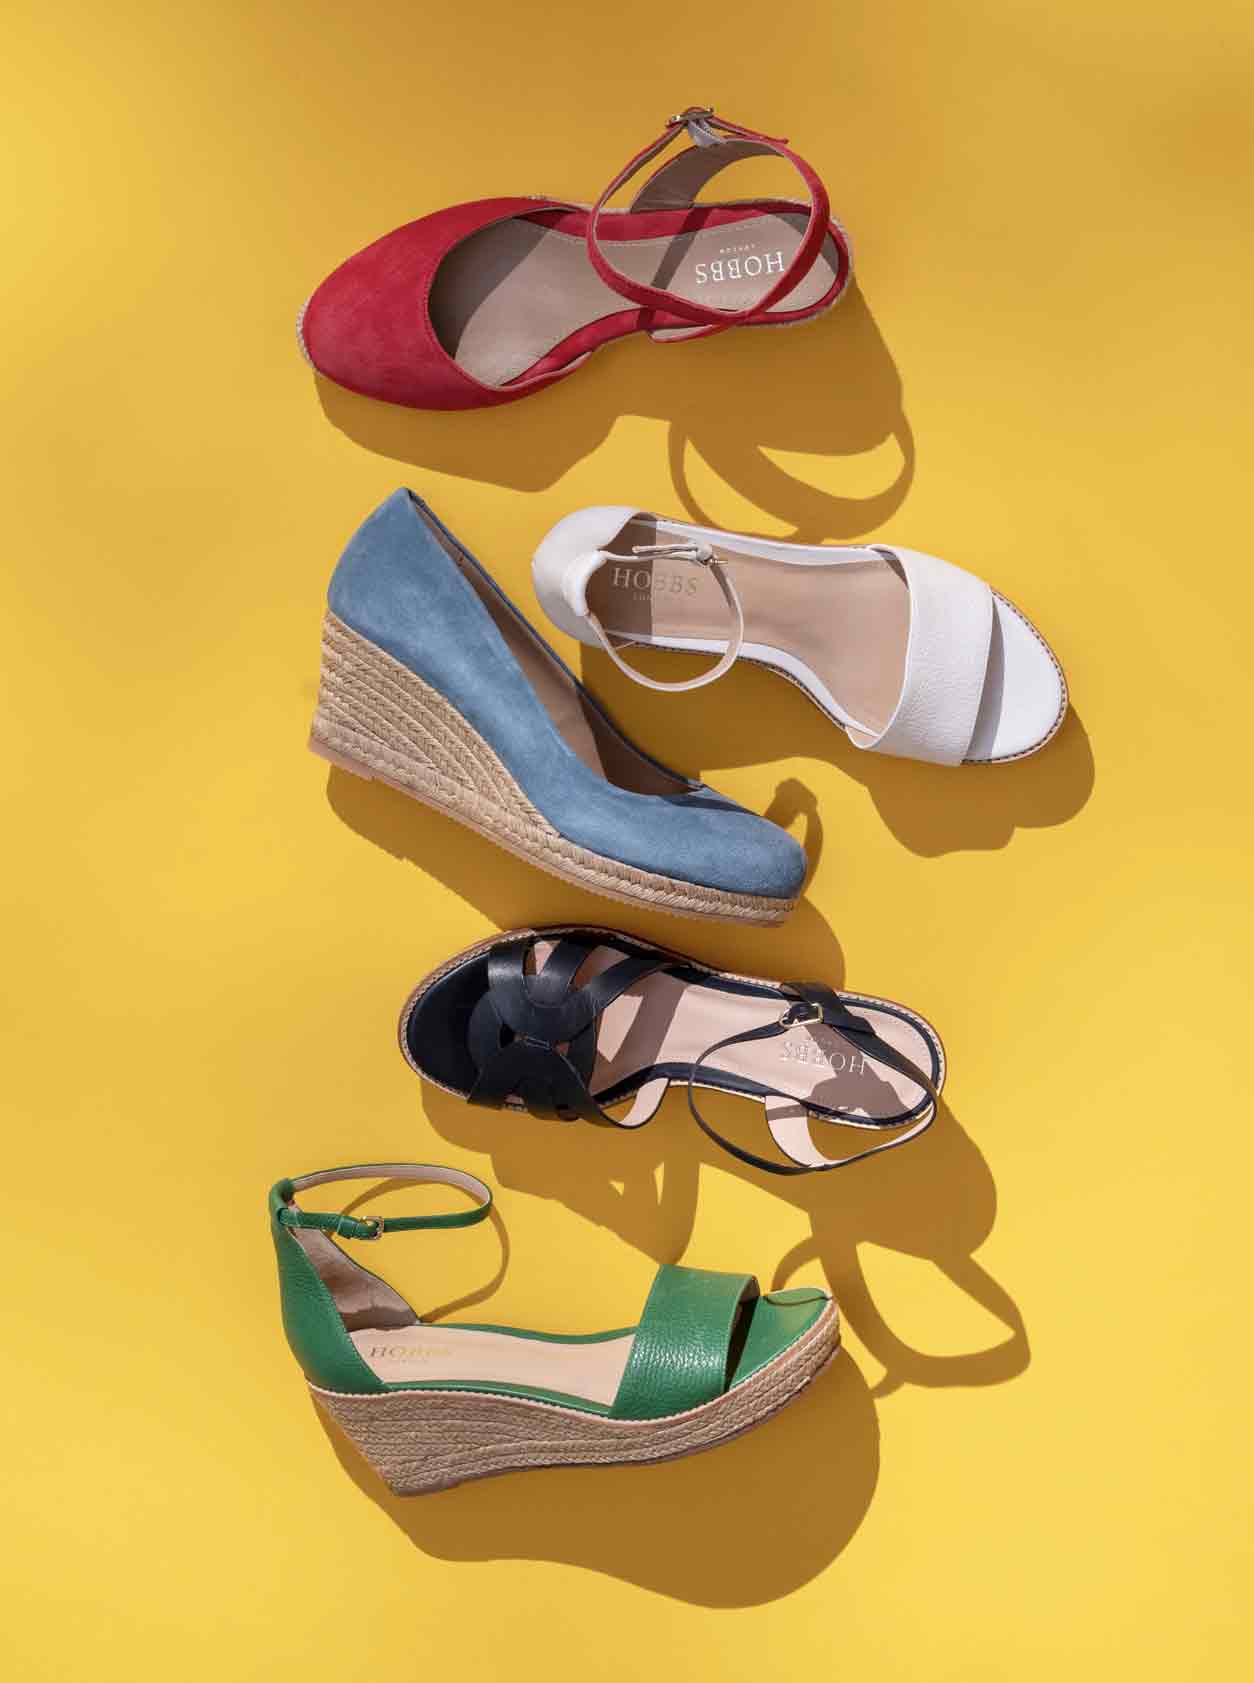 A collection of colourful Hobbs espadrilles on a yellow background.